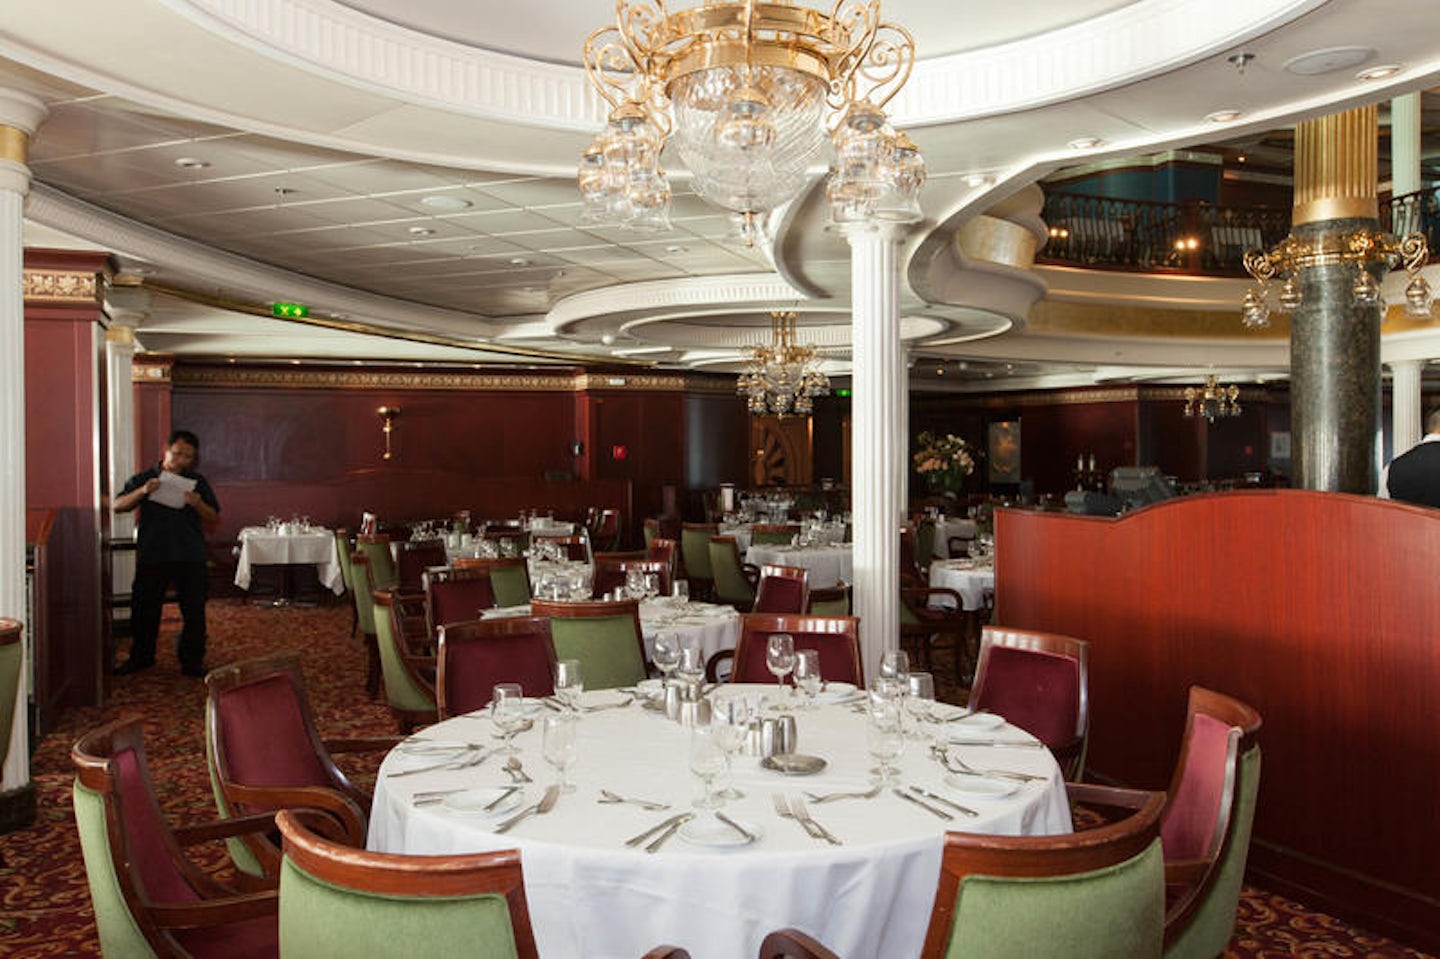 Romeo & Juliet Dining Room on Independence of the Seas